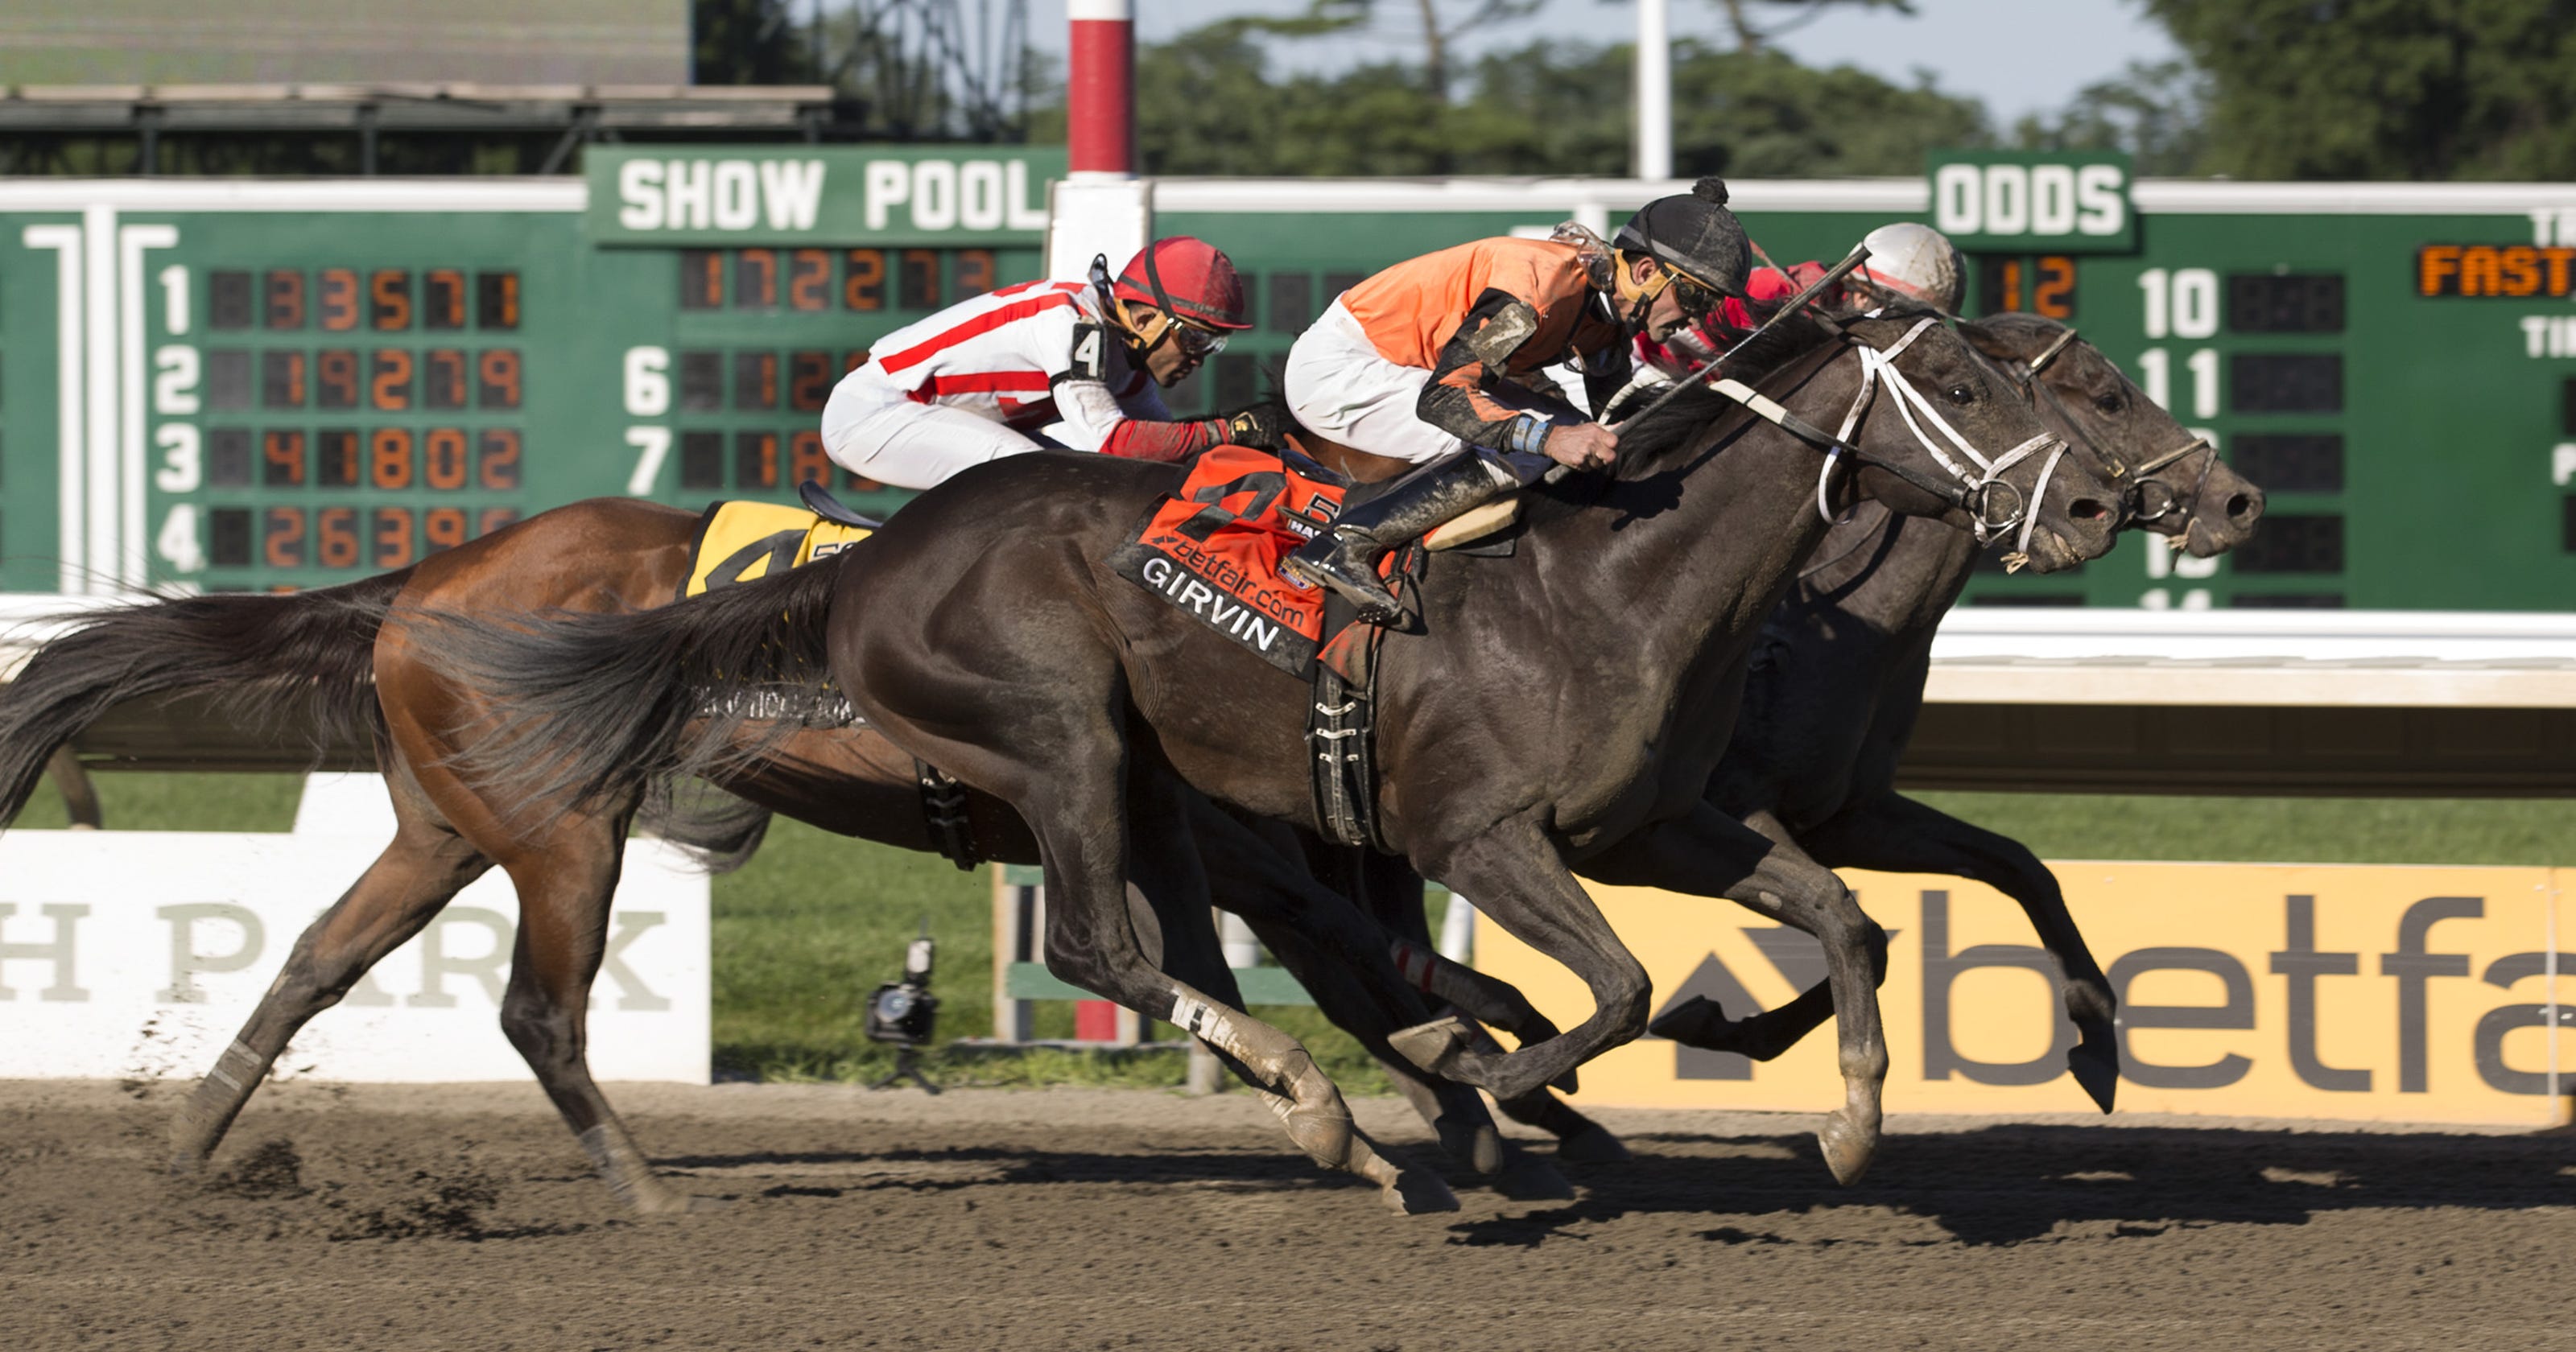 Is Haskell date shift a good move for Monmouth Park signature race?